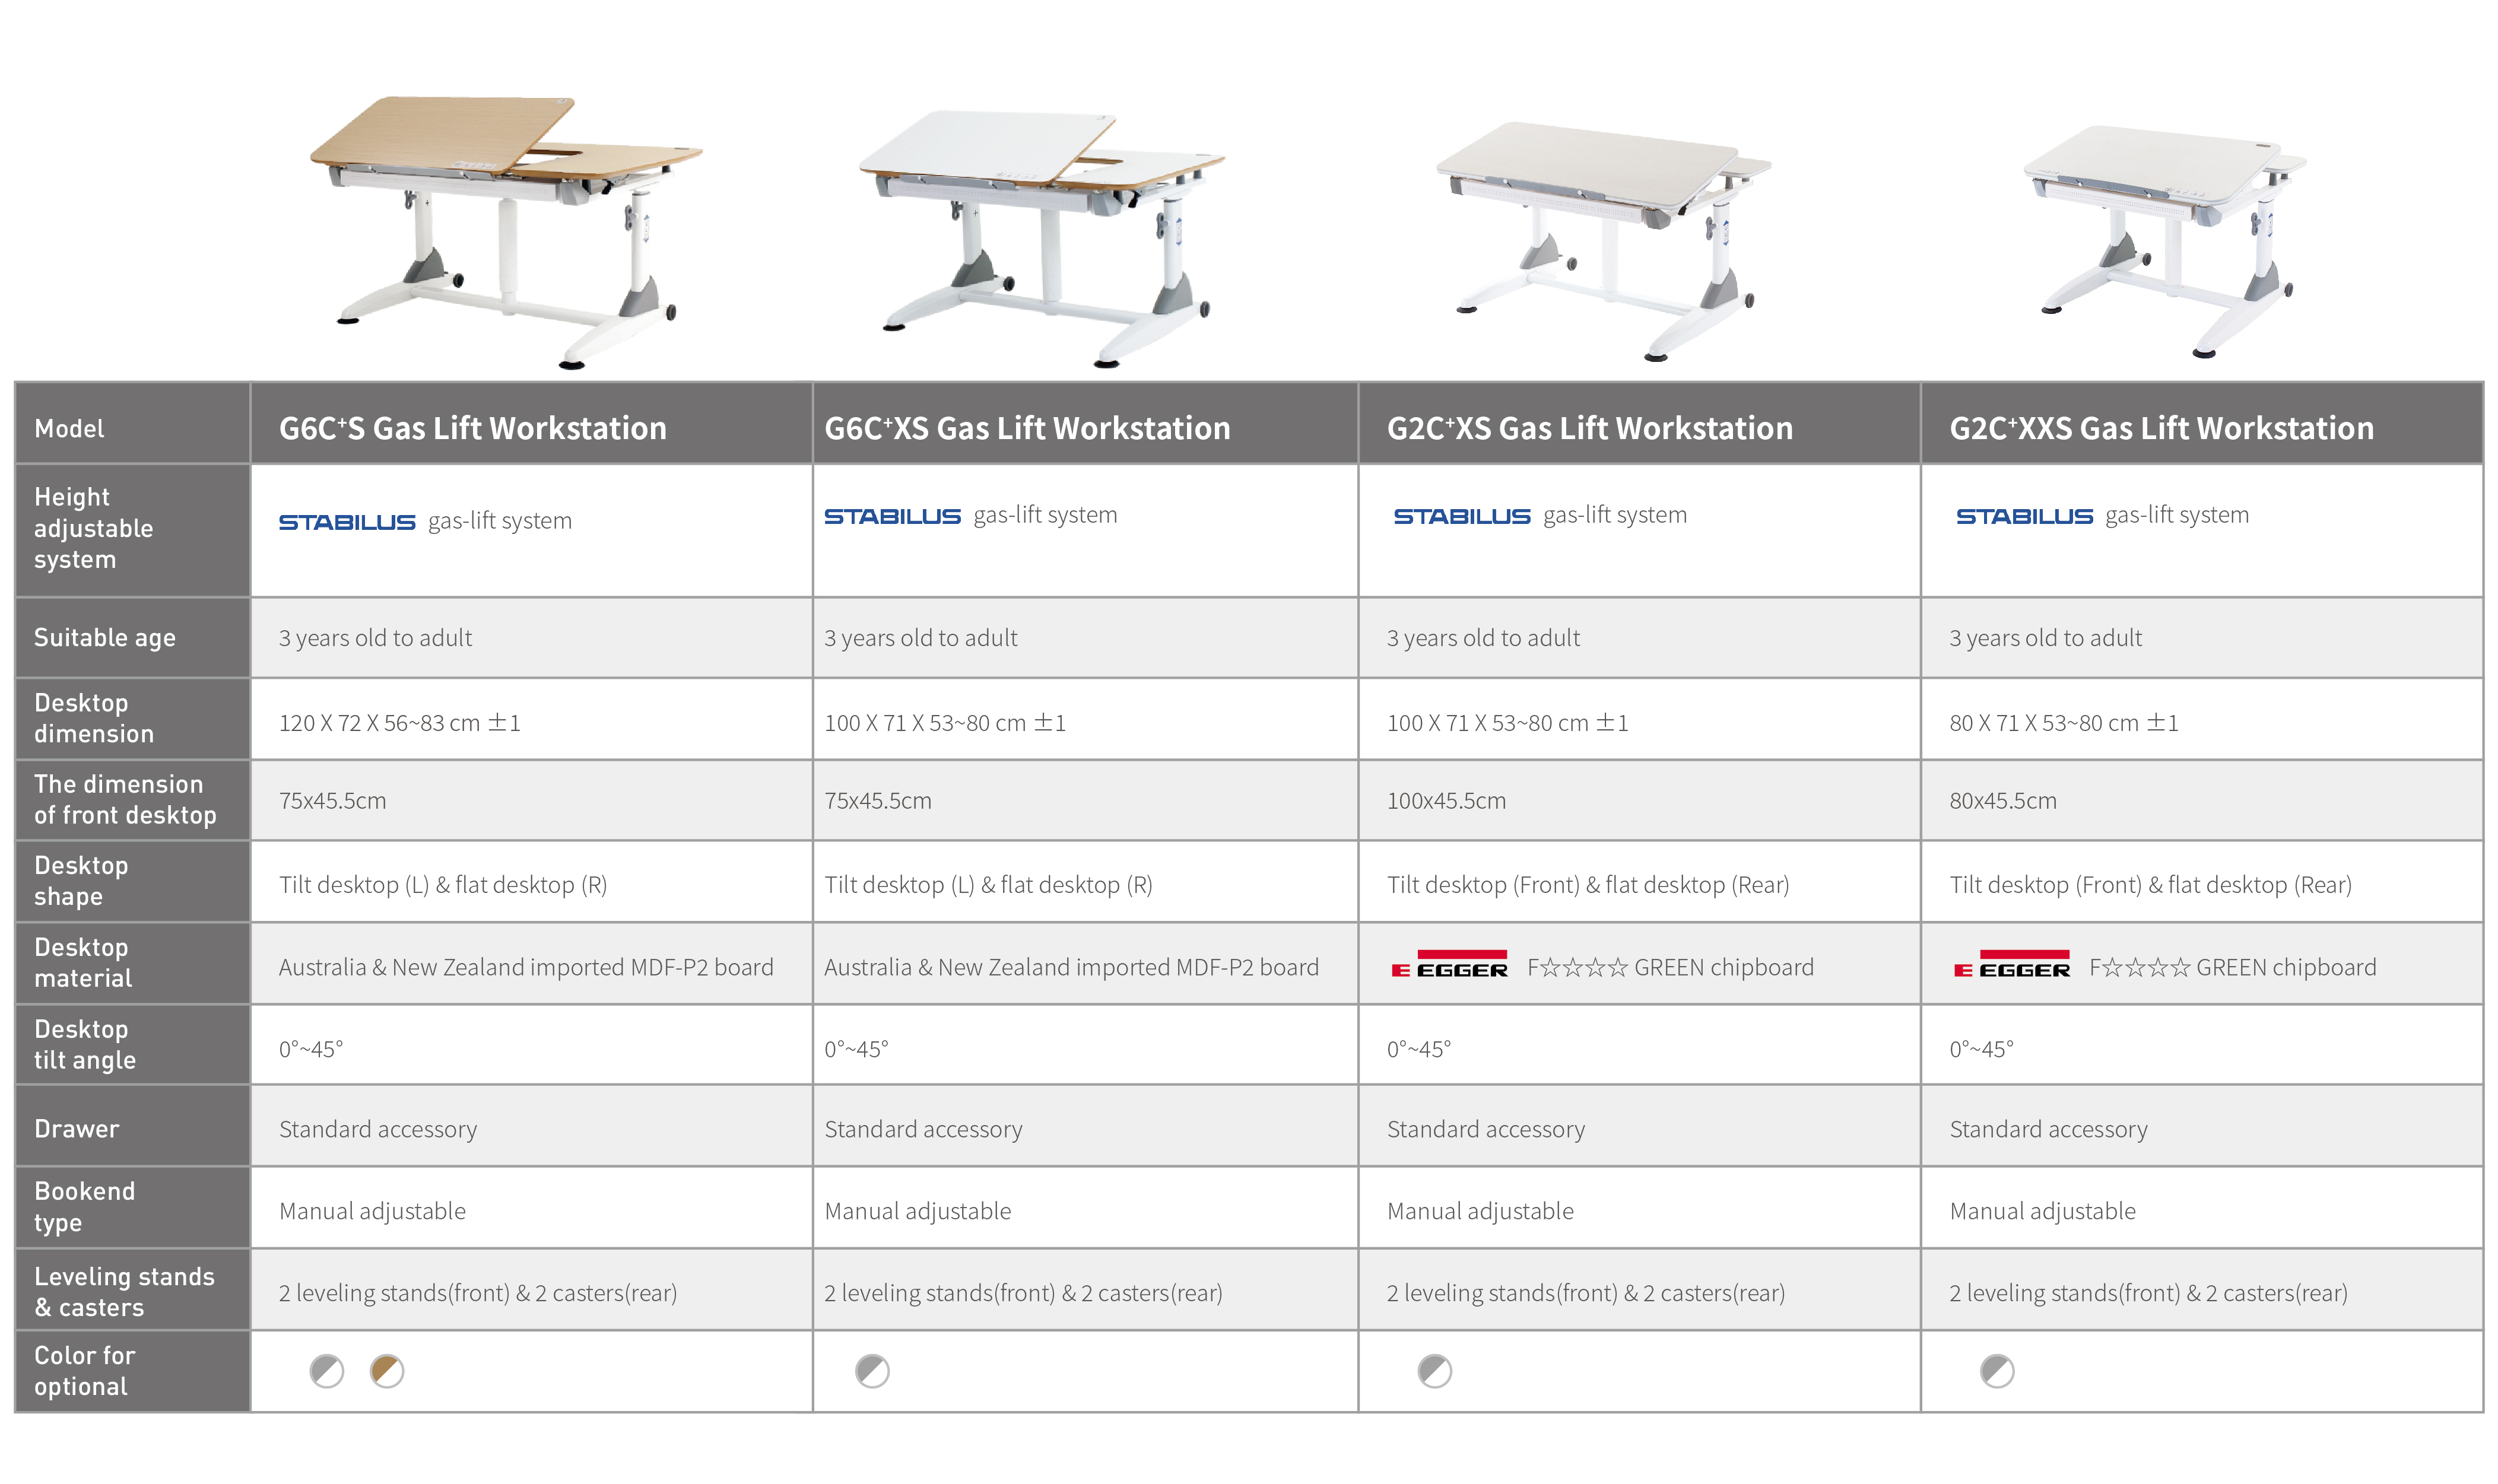 ergonomic furniture, kids study desk, height-adjustable, children's desk, comfort, healthy posture, tilting tabletop, compact size, small spaces, functional workspace, young students.